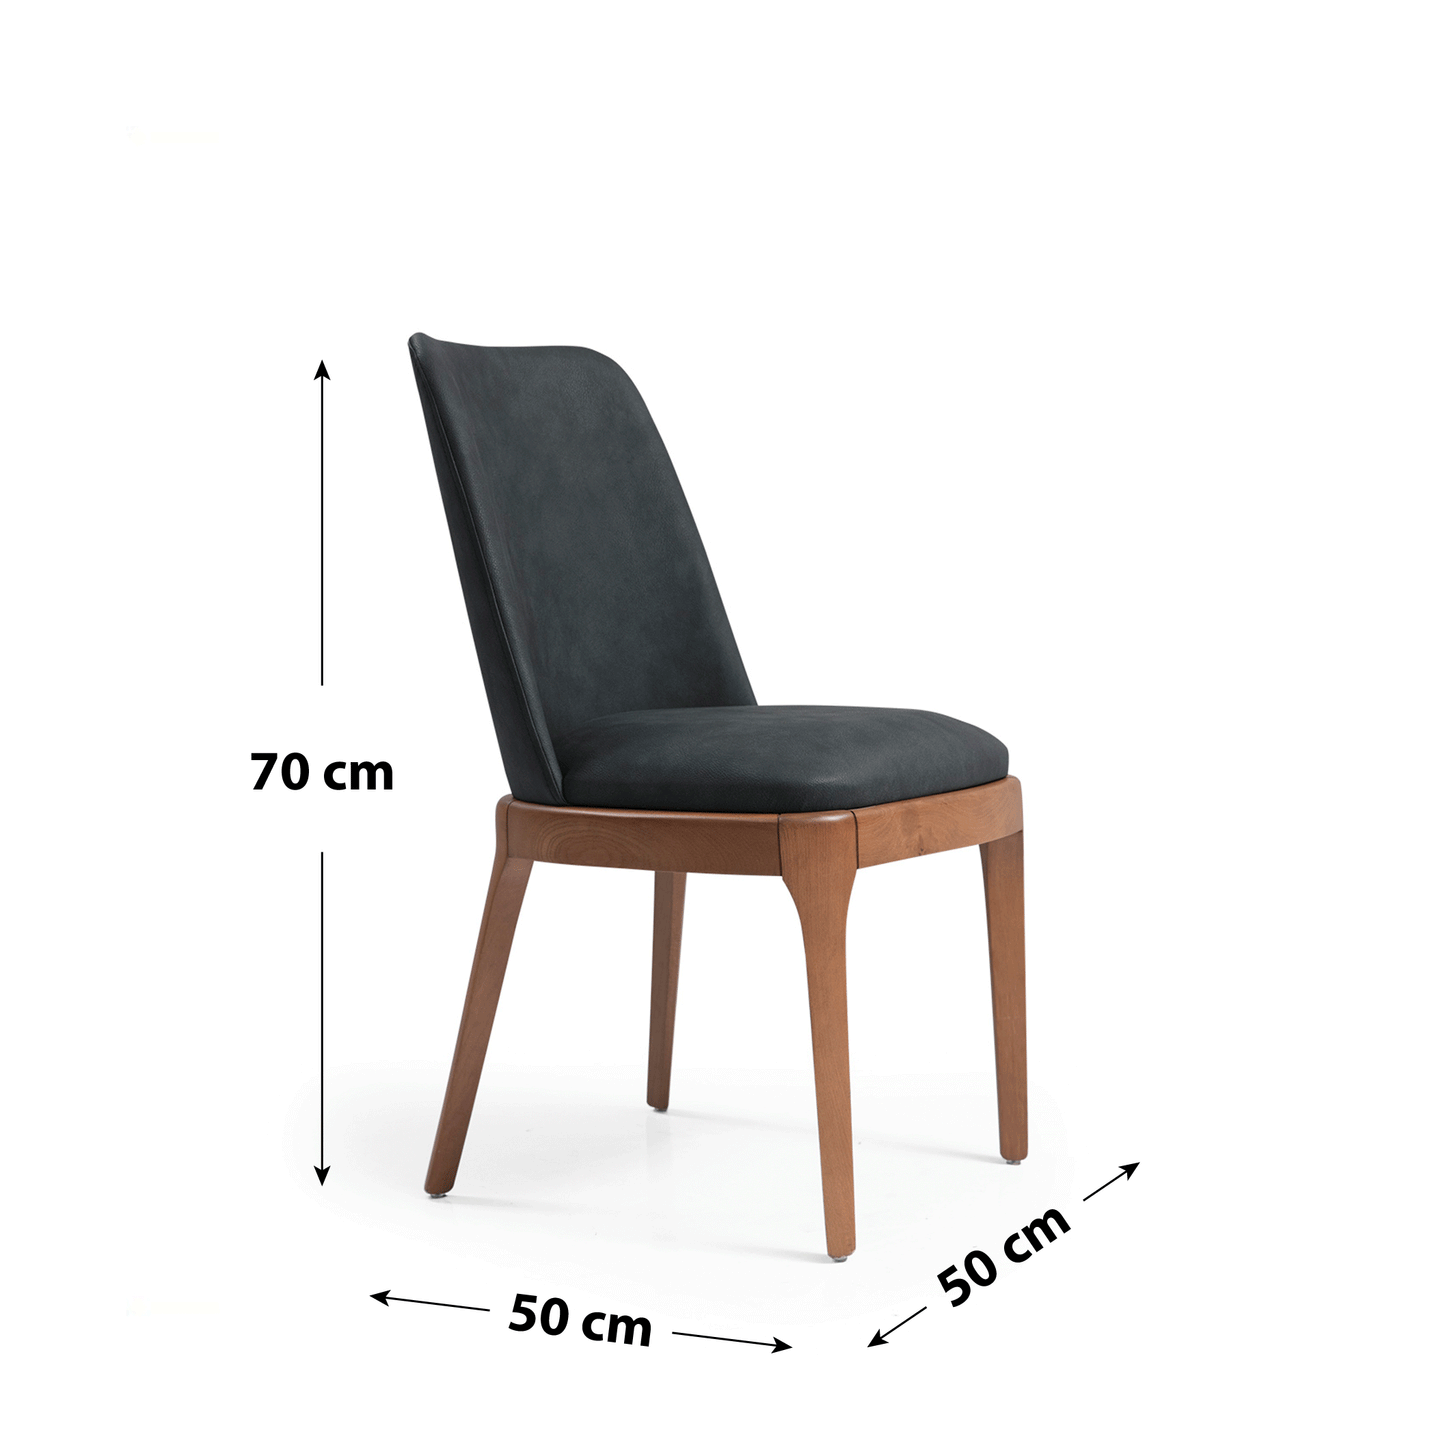 Dining chair 50×50 cm - MADE22-F